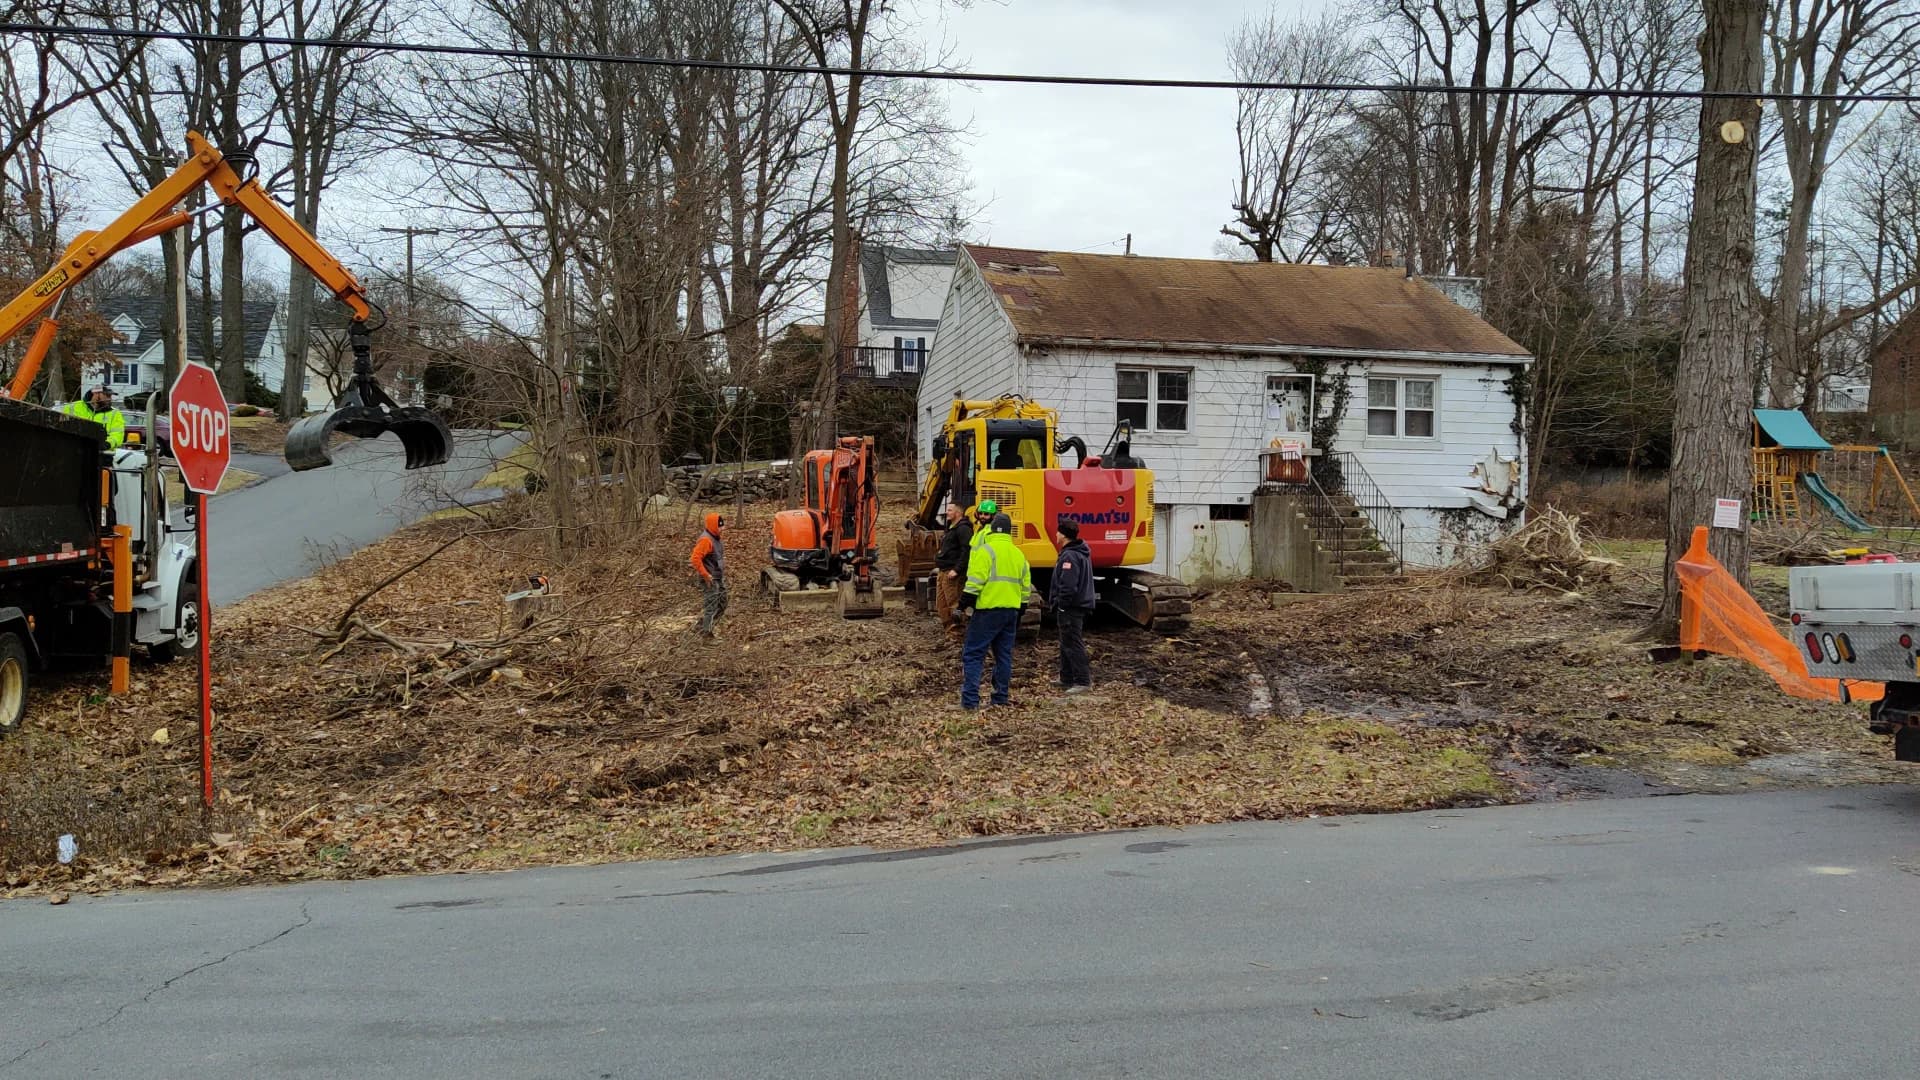 Mount Pleasant house demolished; deemed danger and threat to public safety